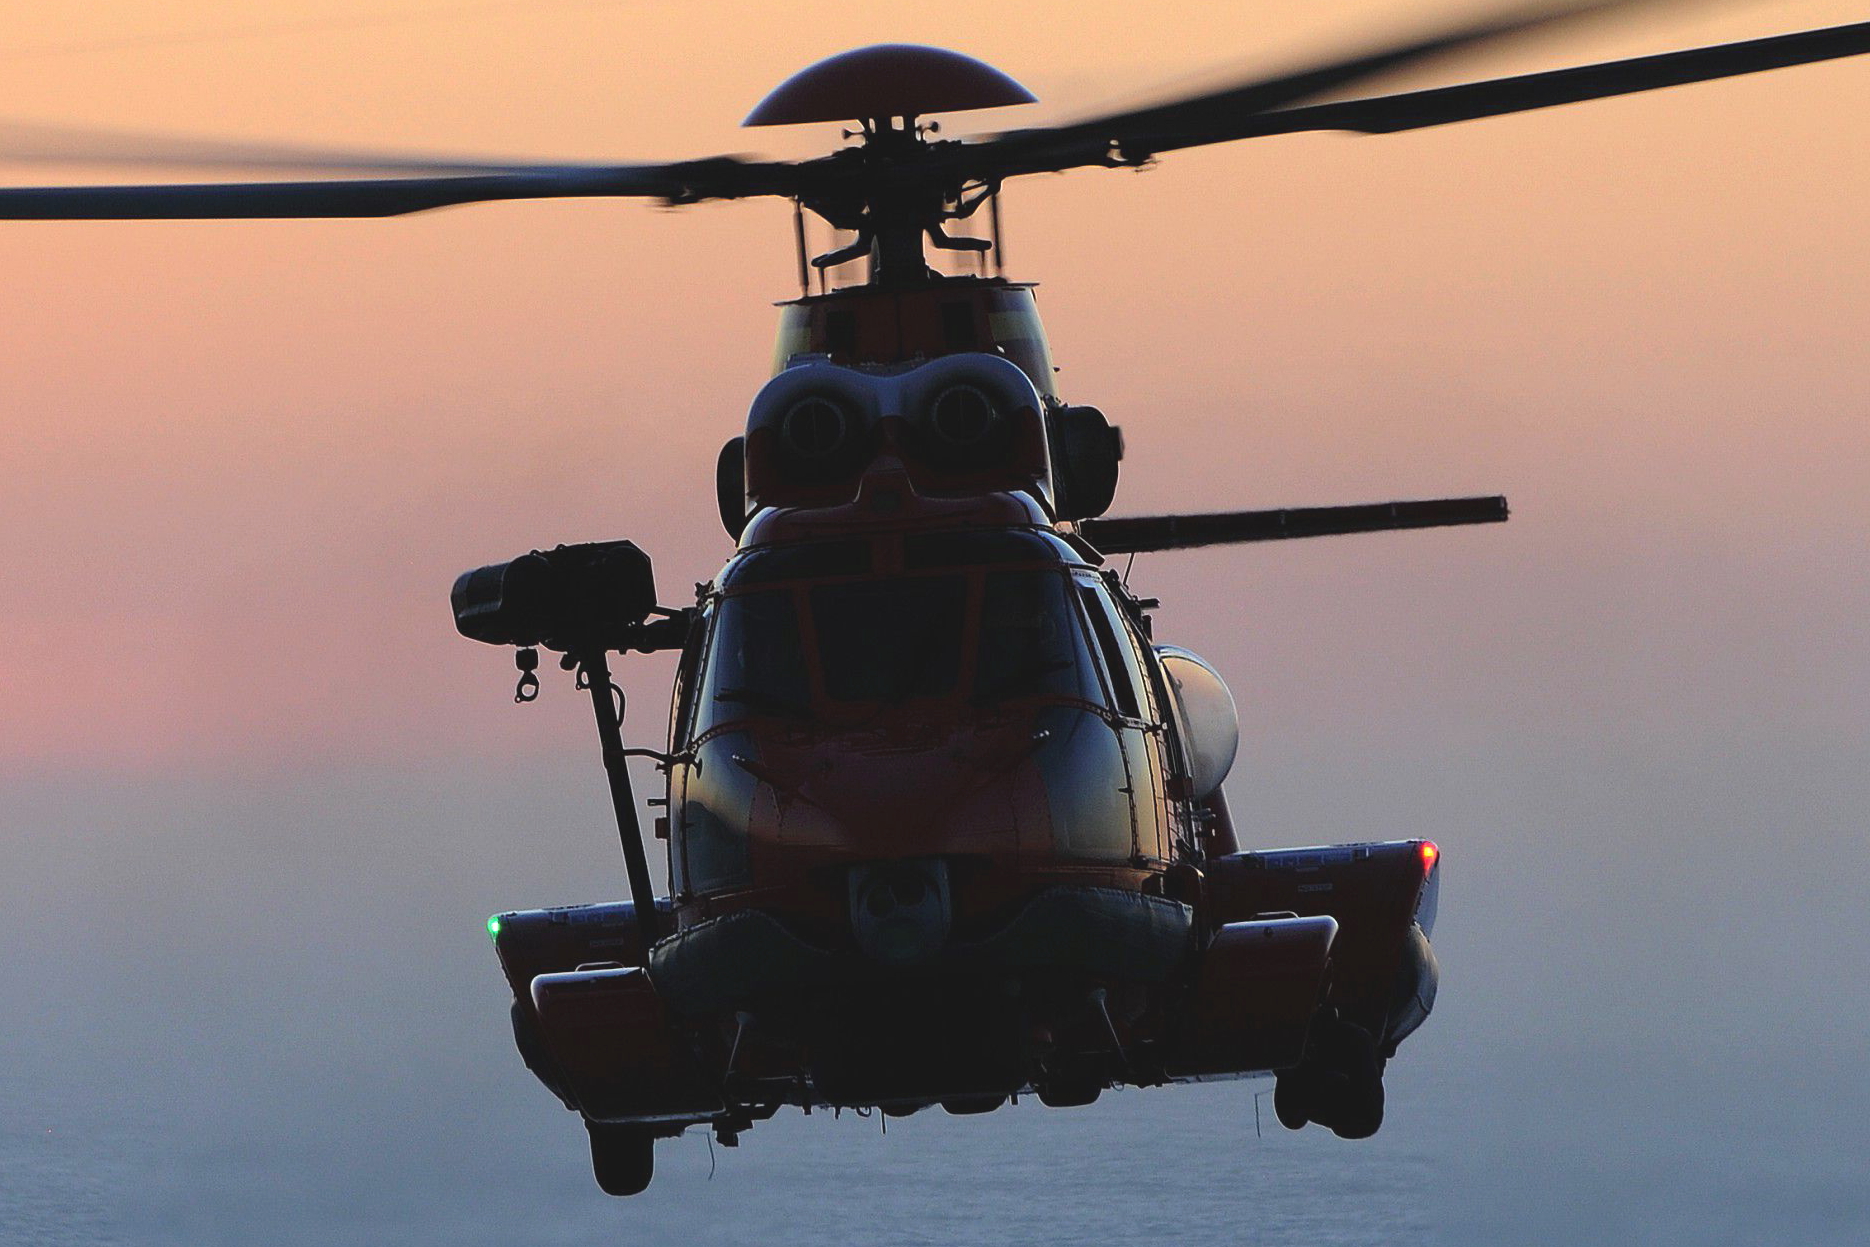 Air Greenland has ordered two Airbus H225 heavy helicopters to support its bid to win its home country’s search and rescue (SAR) contract. Under the terms of a firm contract, two H225s repurposed from the oil and gas industry will be delivered over the coming months to replace the ageing S-61 helicopter currently used for the service. Click to enlarge.